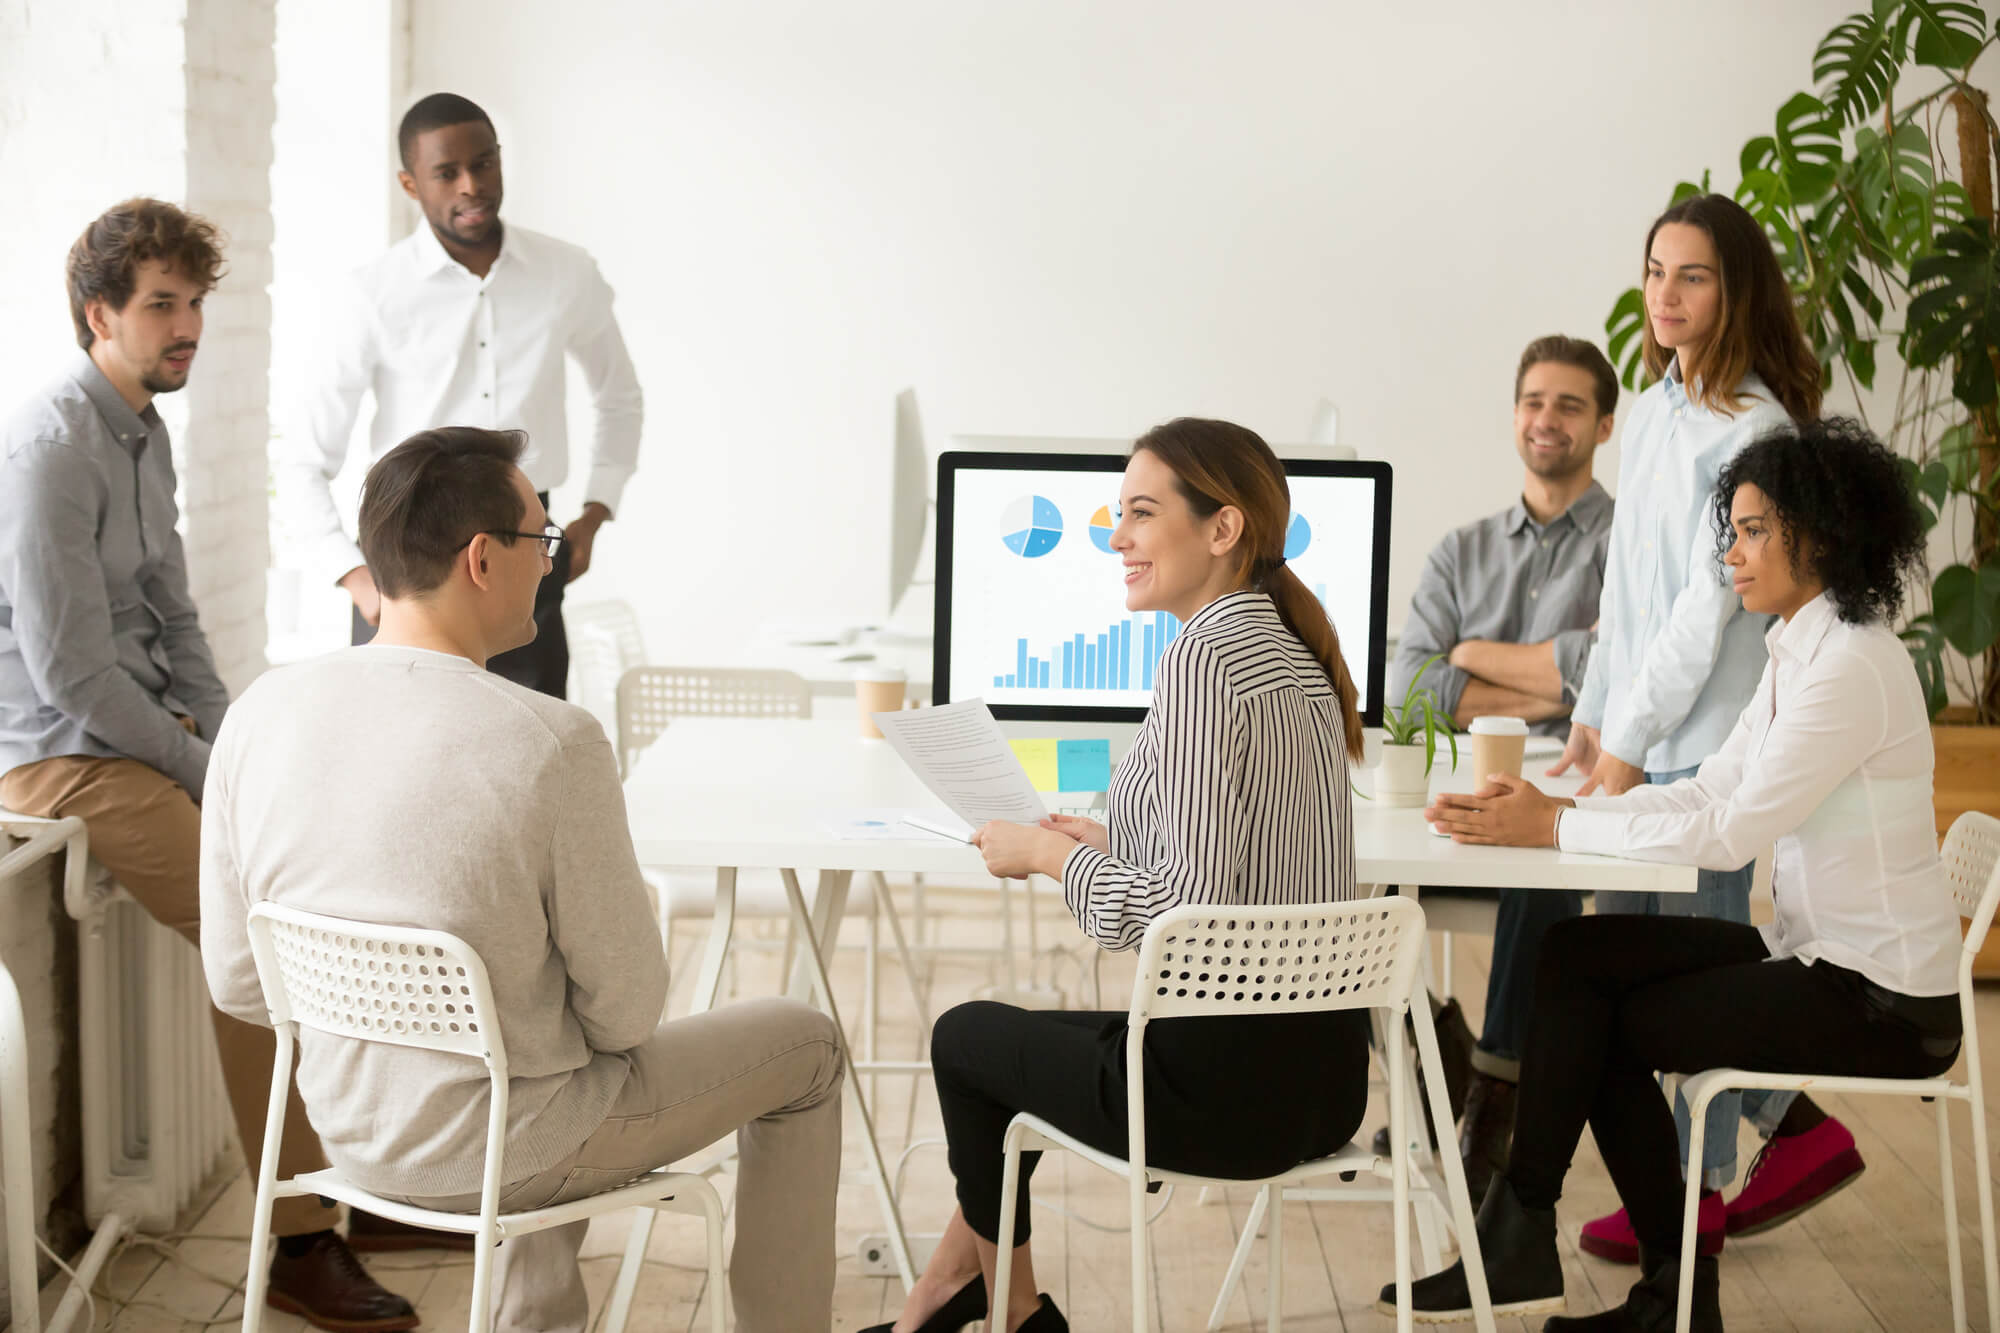 inclusive hiring tips featured image of diverse people sitting in office interview